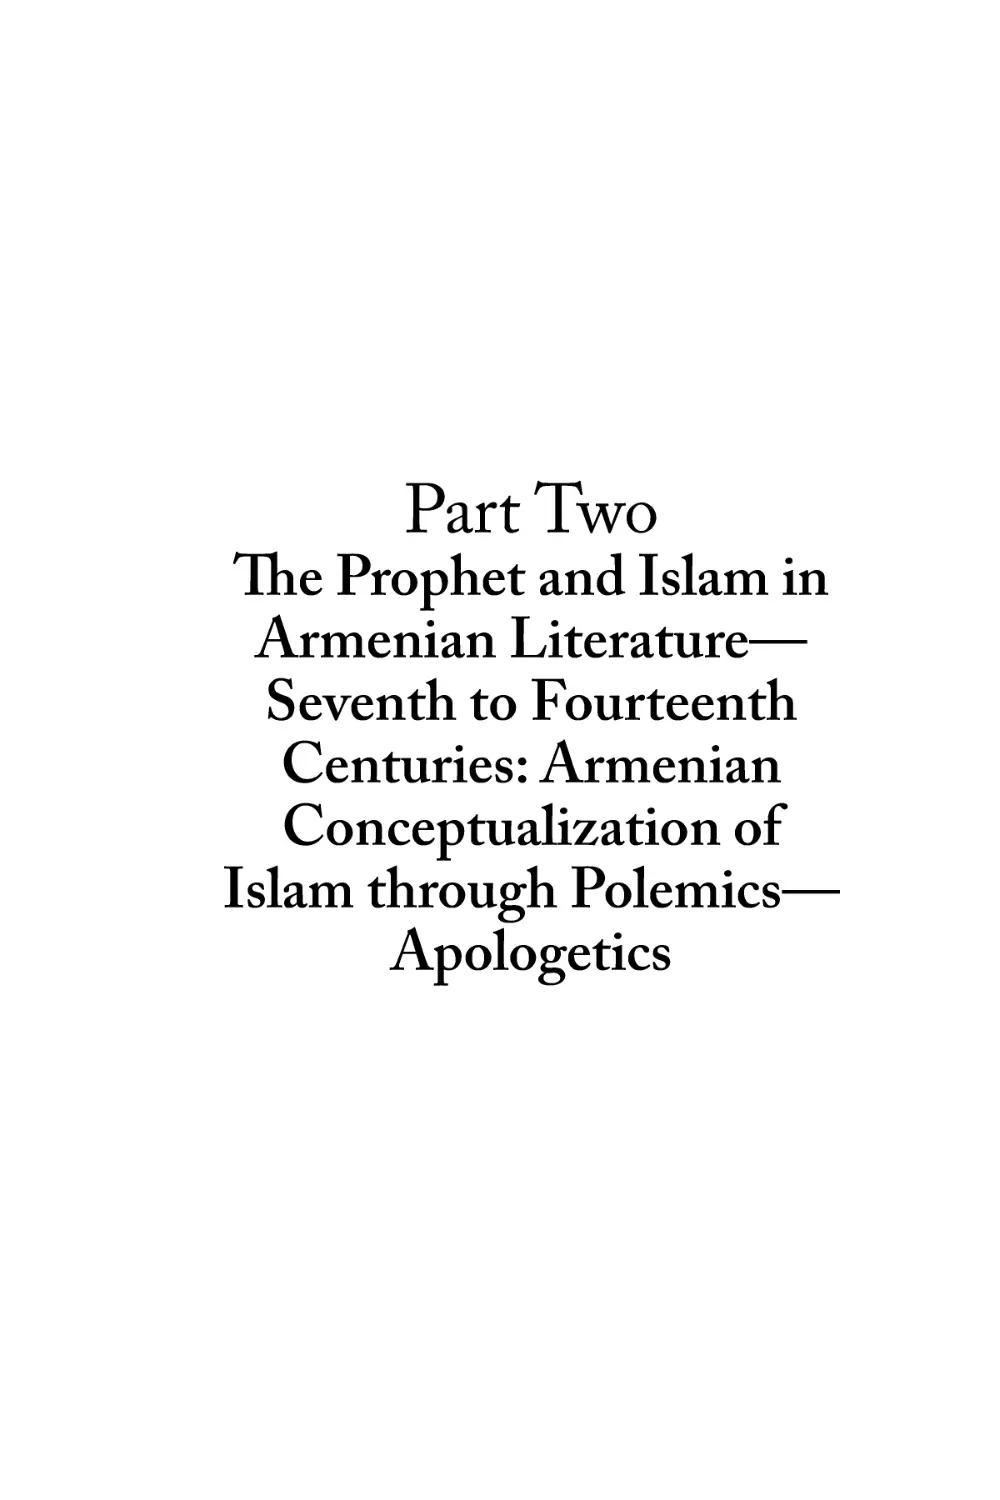 Part Two The Prophet and Islam in Armenian Literature—Seventh to Fourteenth Centuries